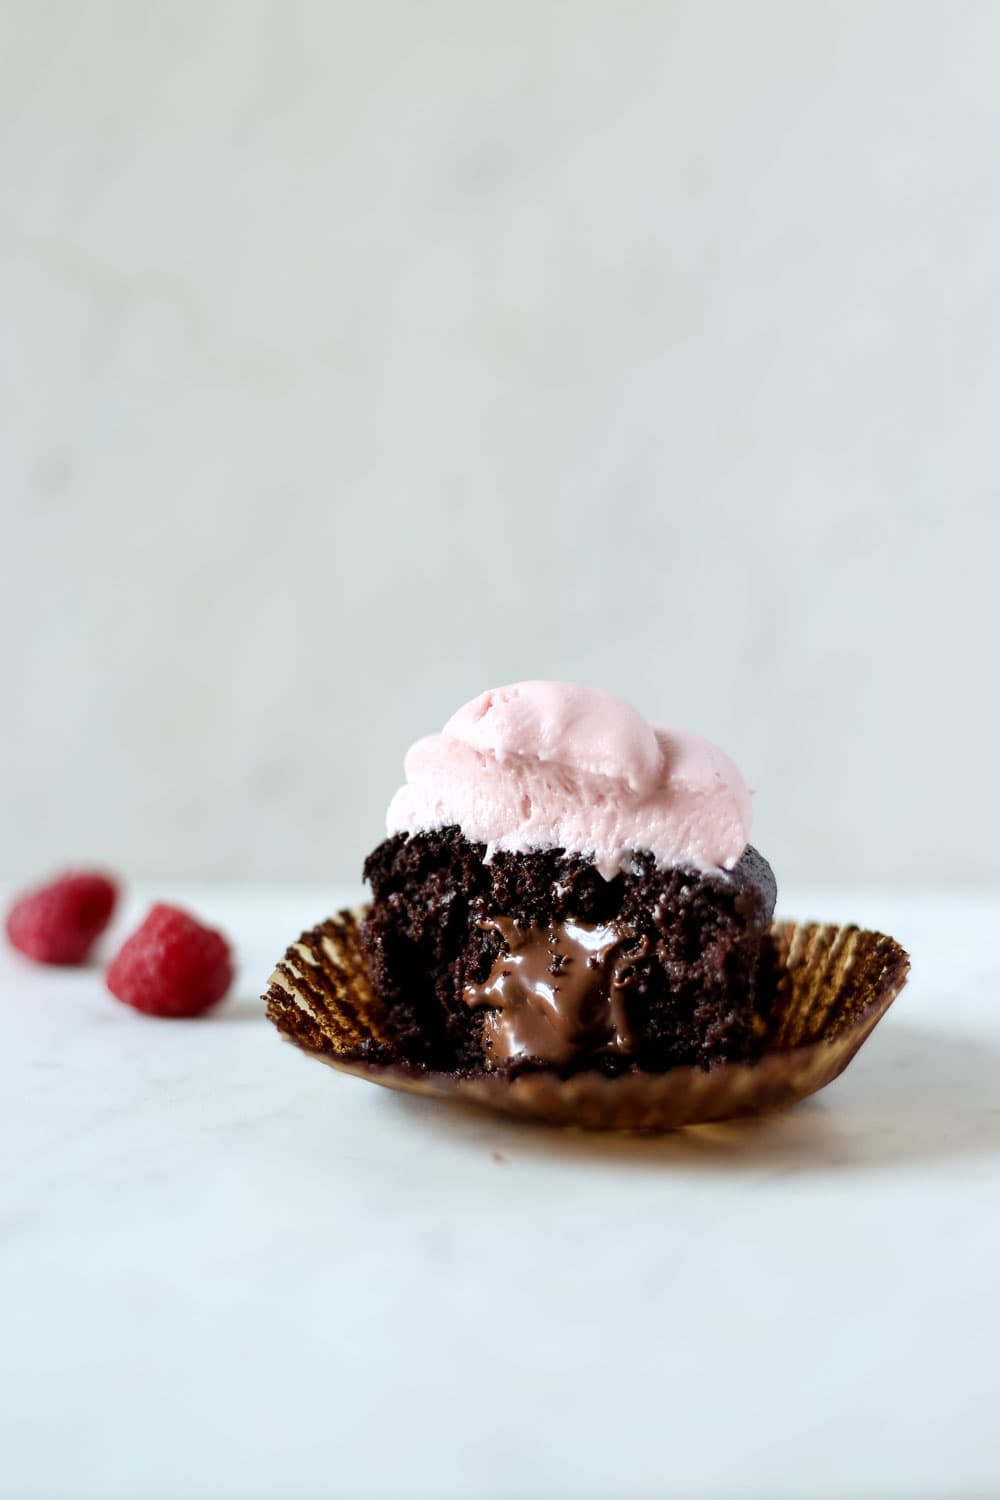 Nutella Stuffed Chocolate Raspberry Cupcakes - perfect for Valentine's Day!